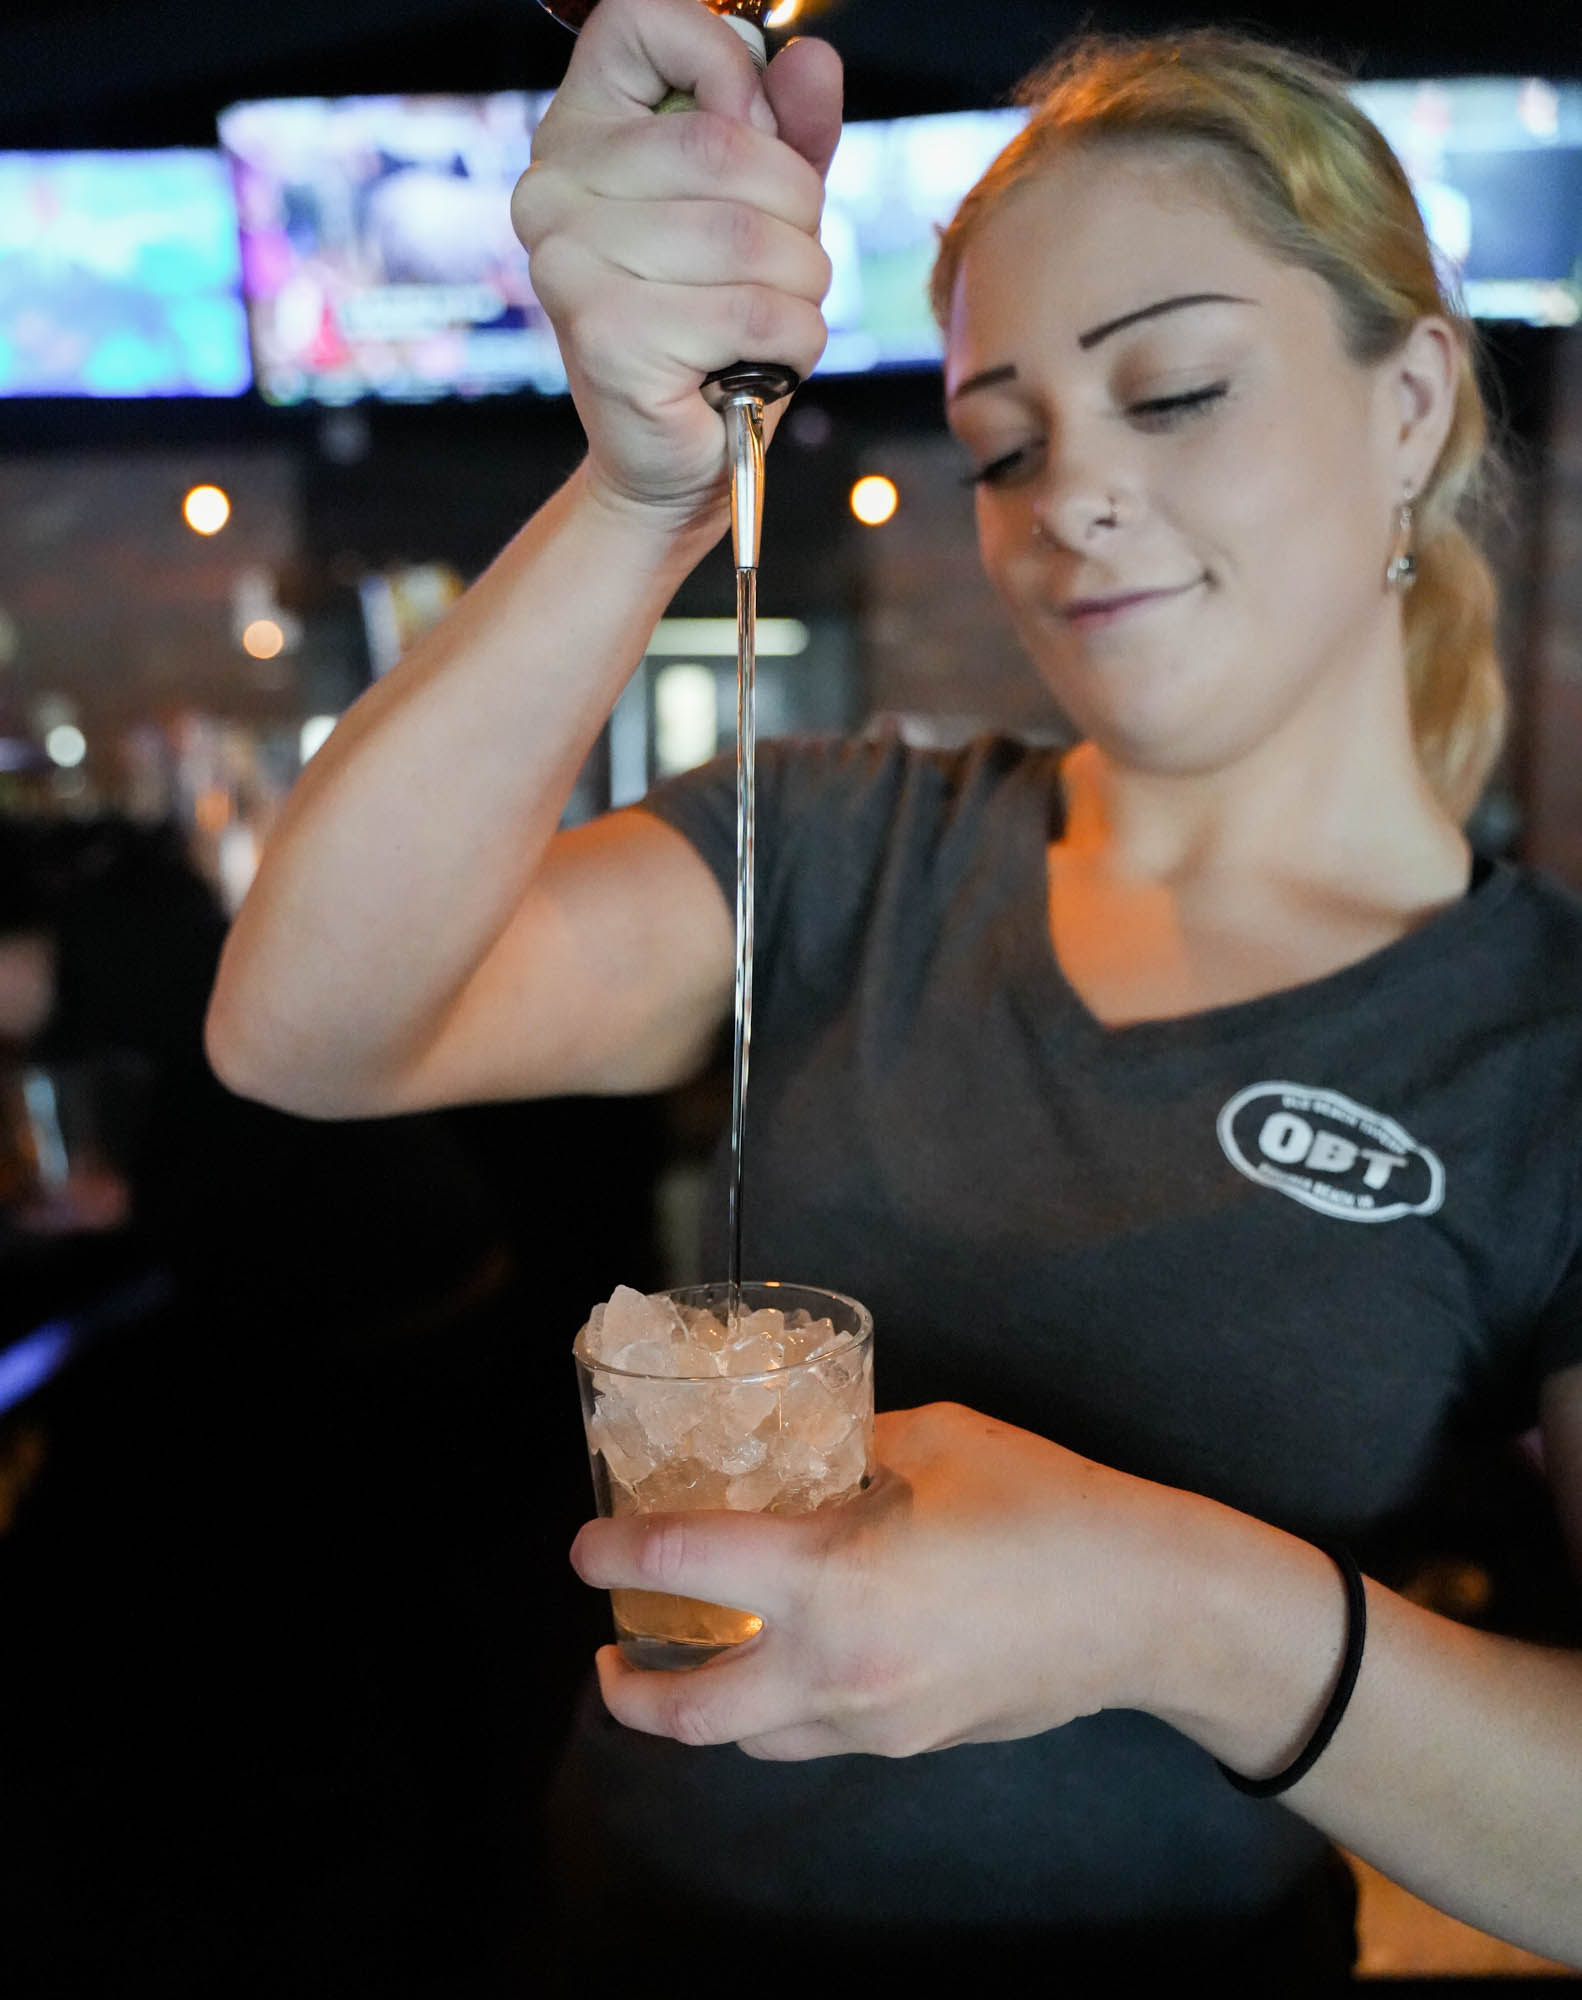 Bartender pouring a cocktail in an iced glass